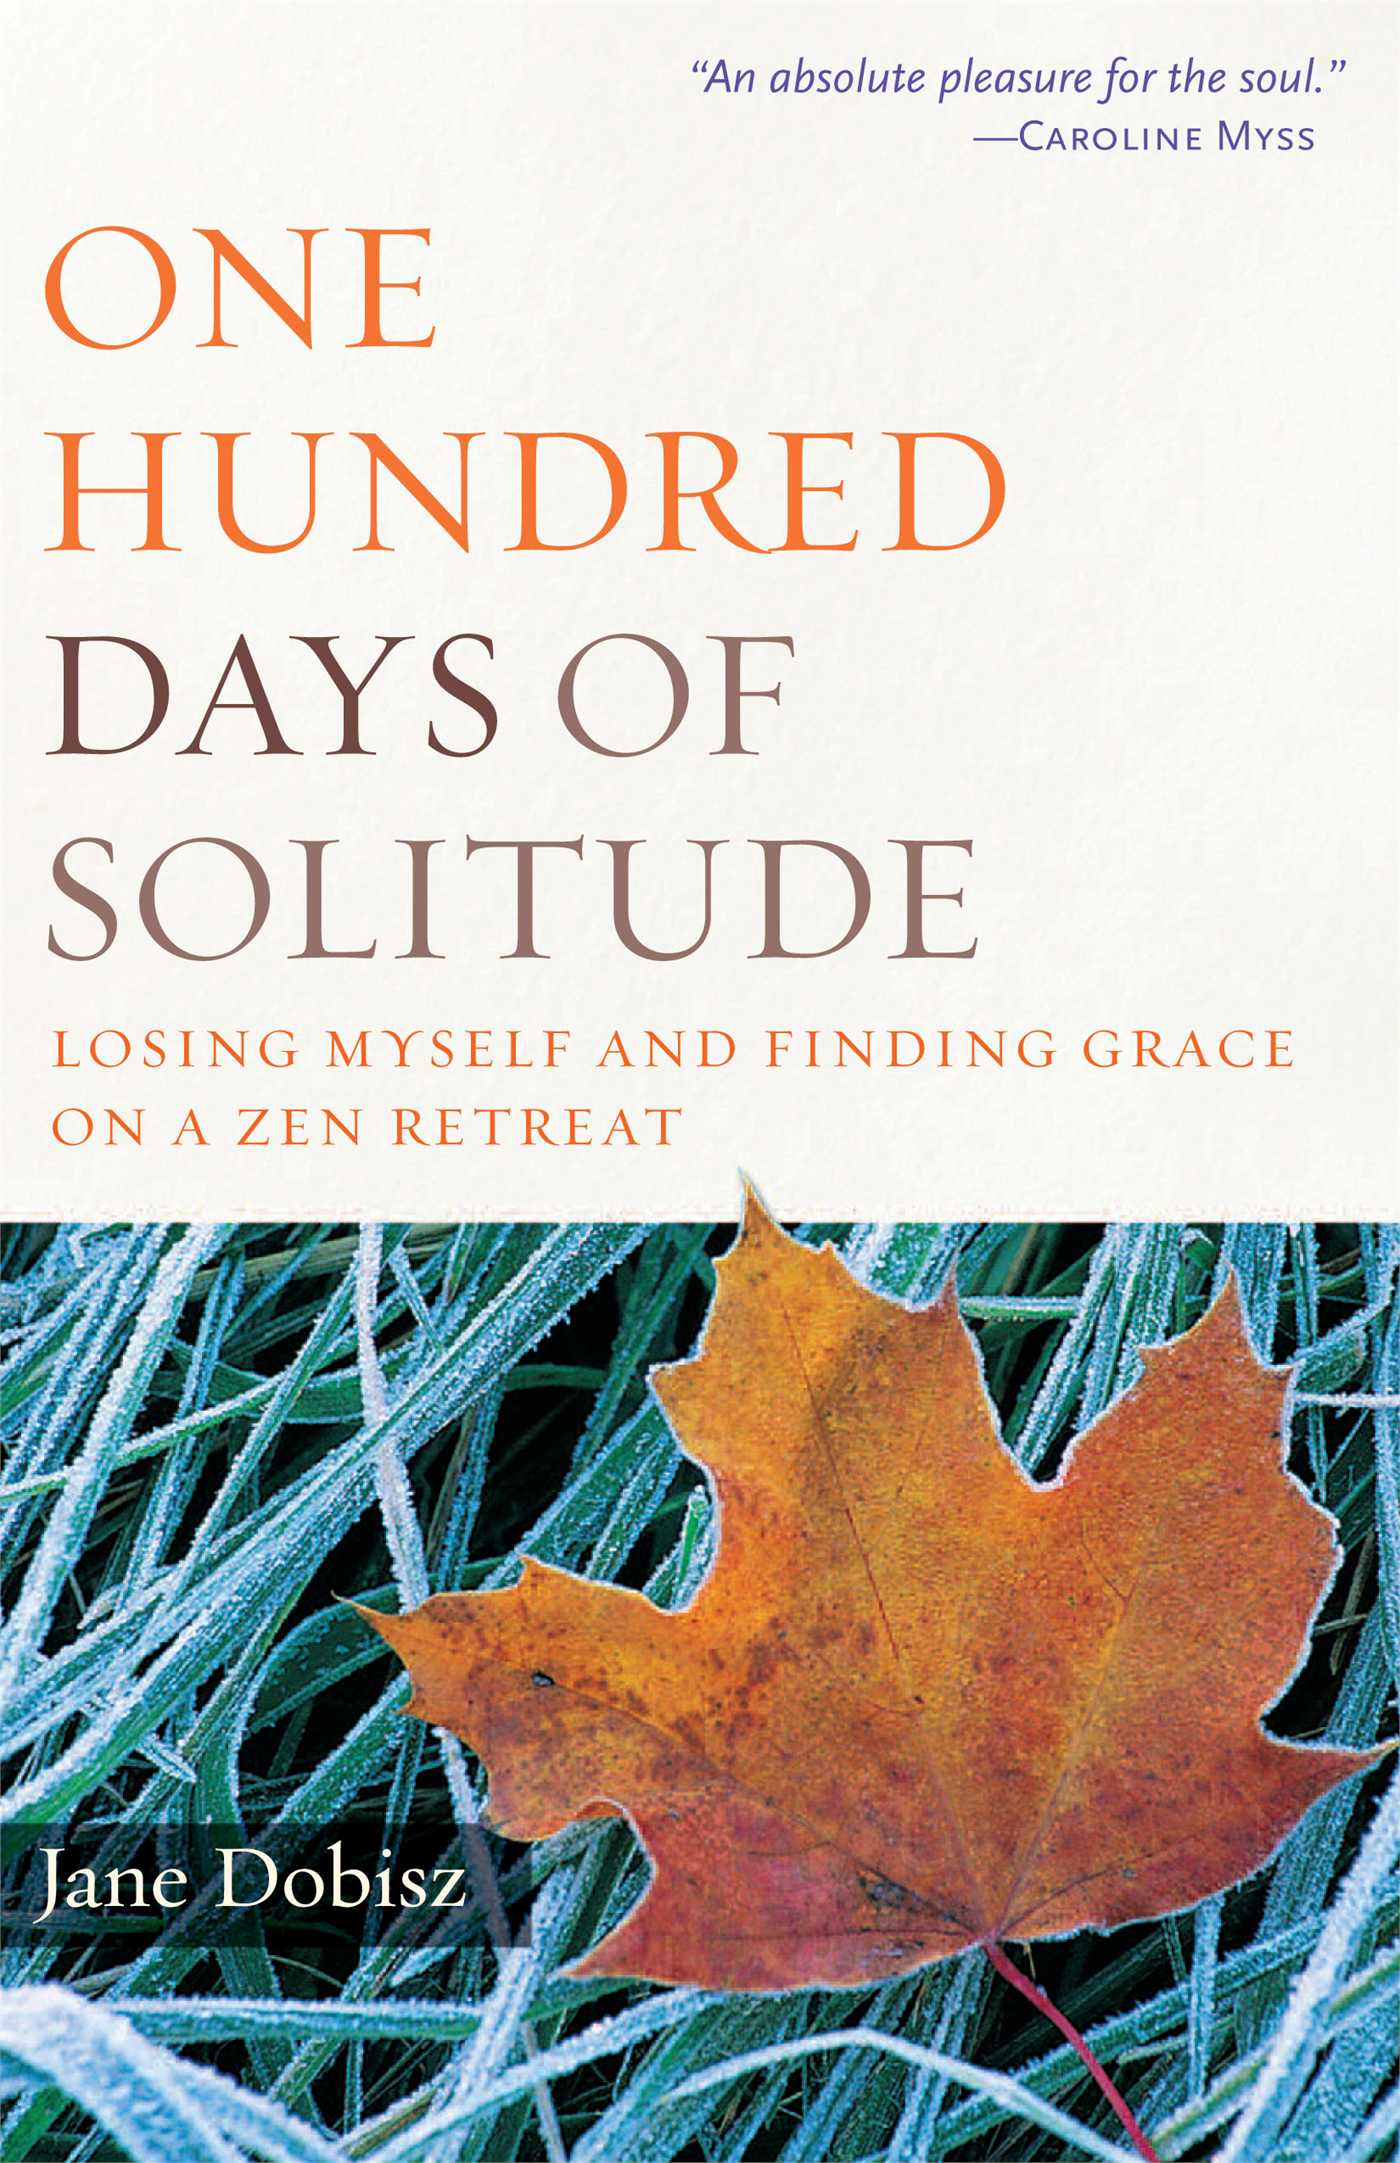 100 days of solitude: losing myself and finding grace on a Zen retreat